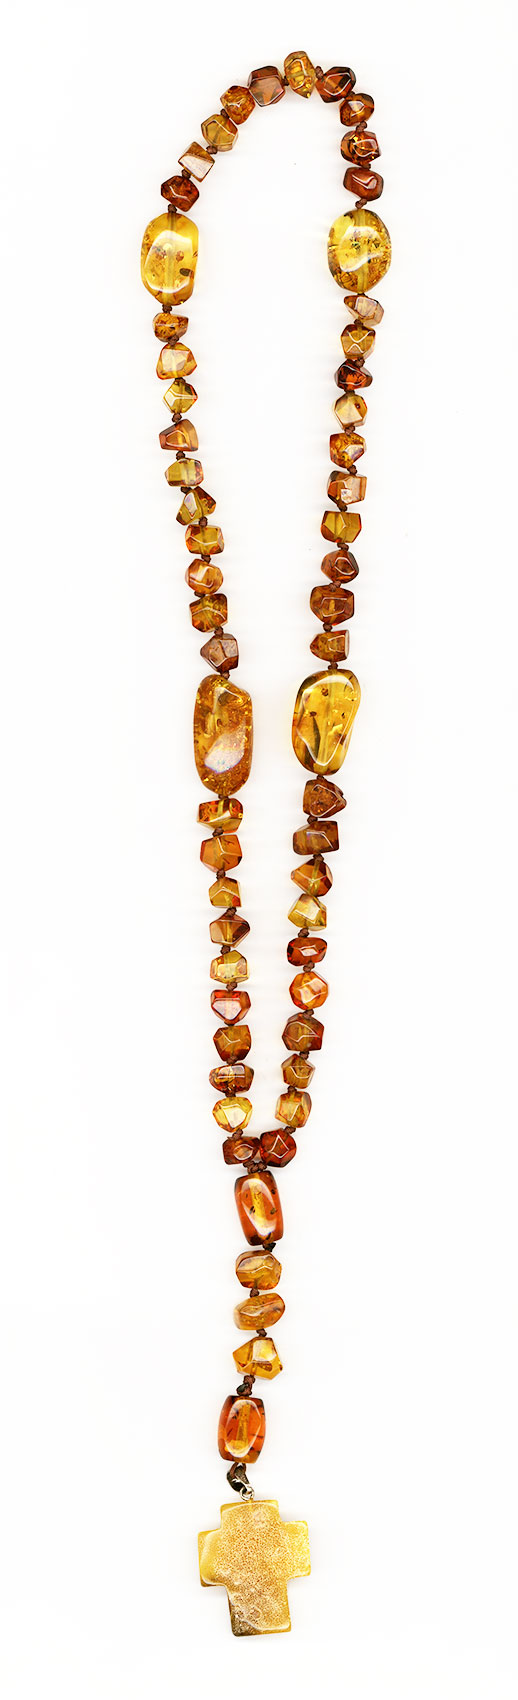 Catholic prayer object (Rosary) made of genuine amber from Baltic sea - cut by hand